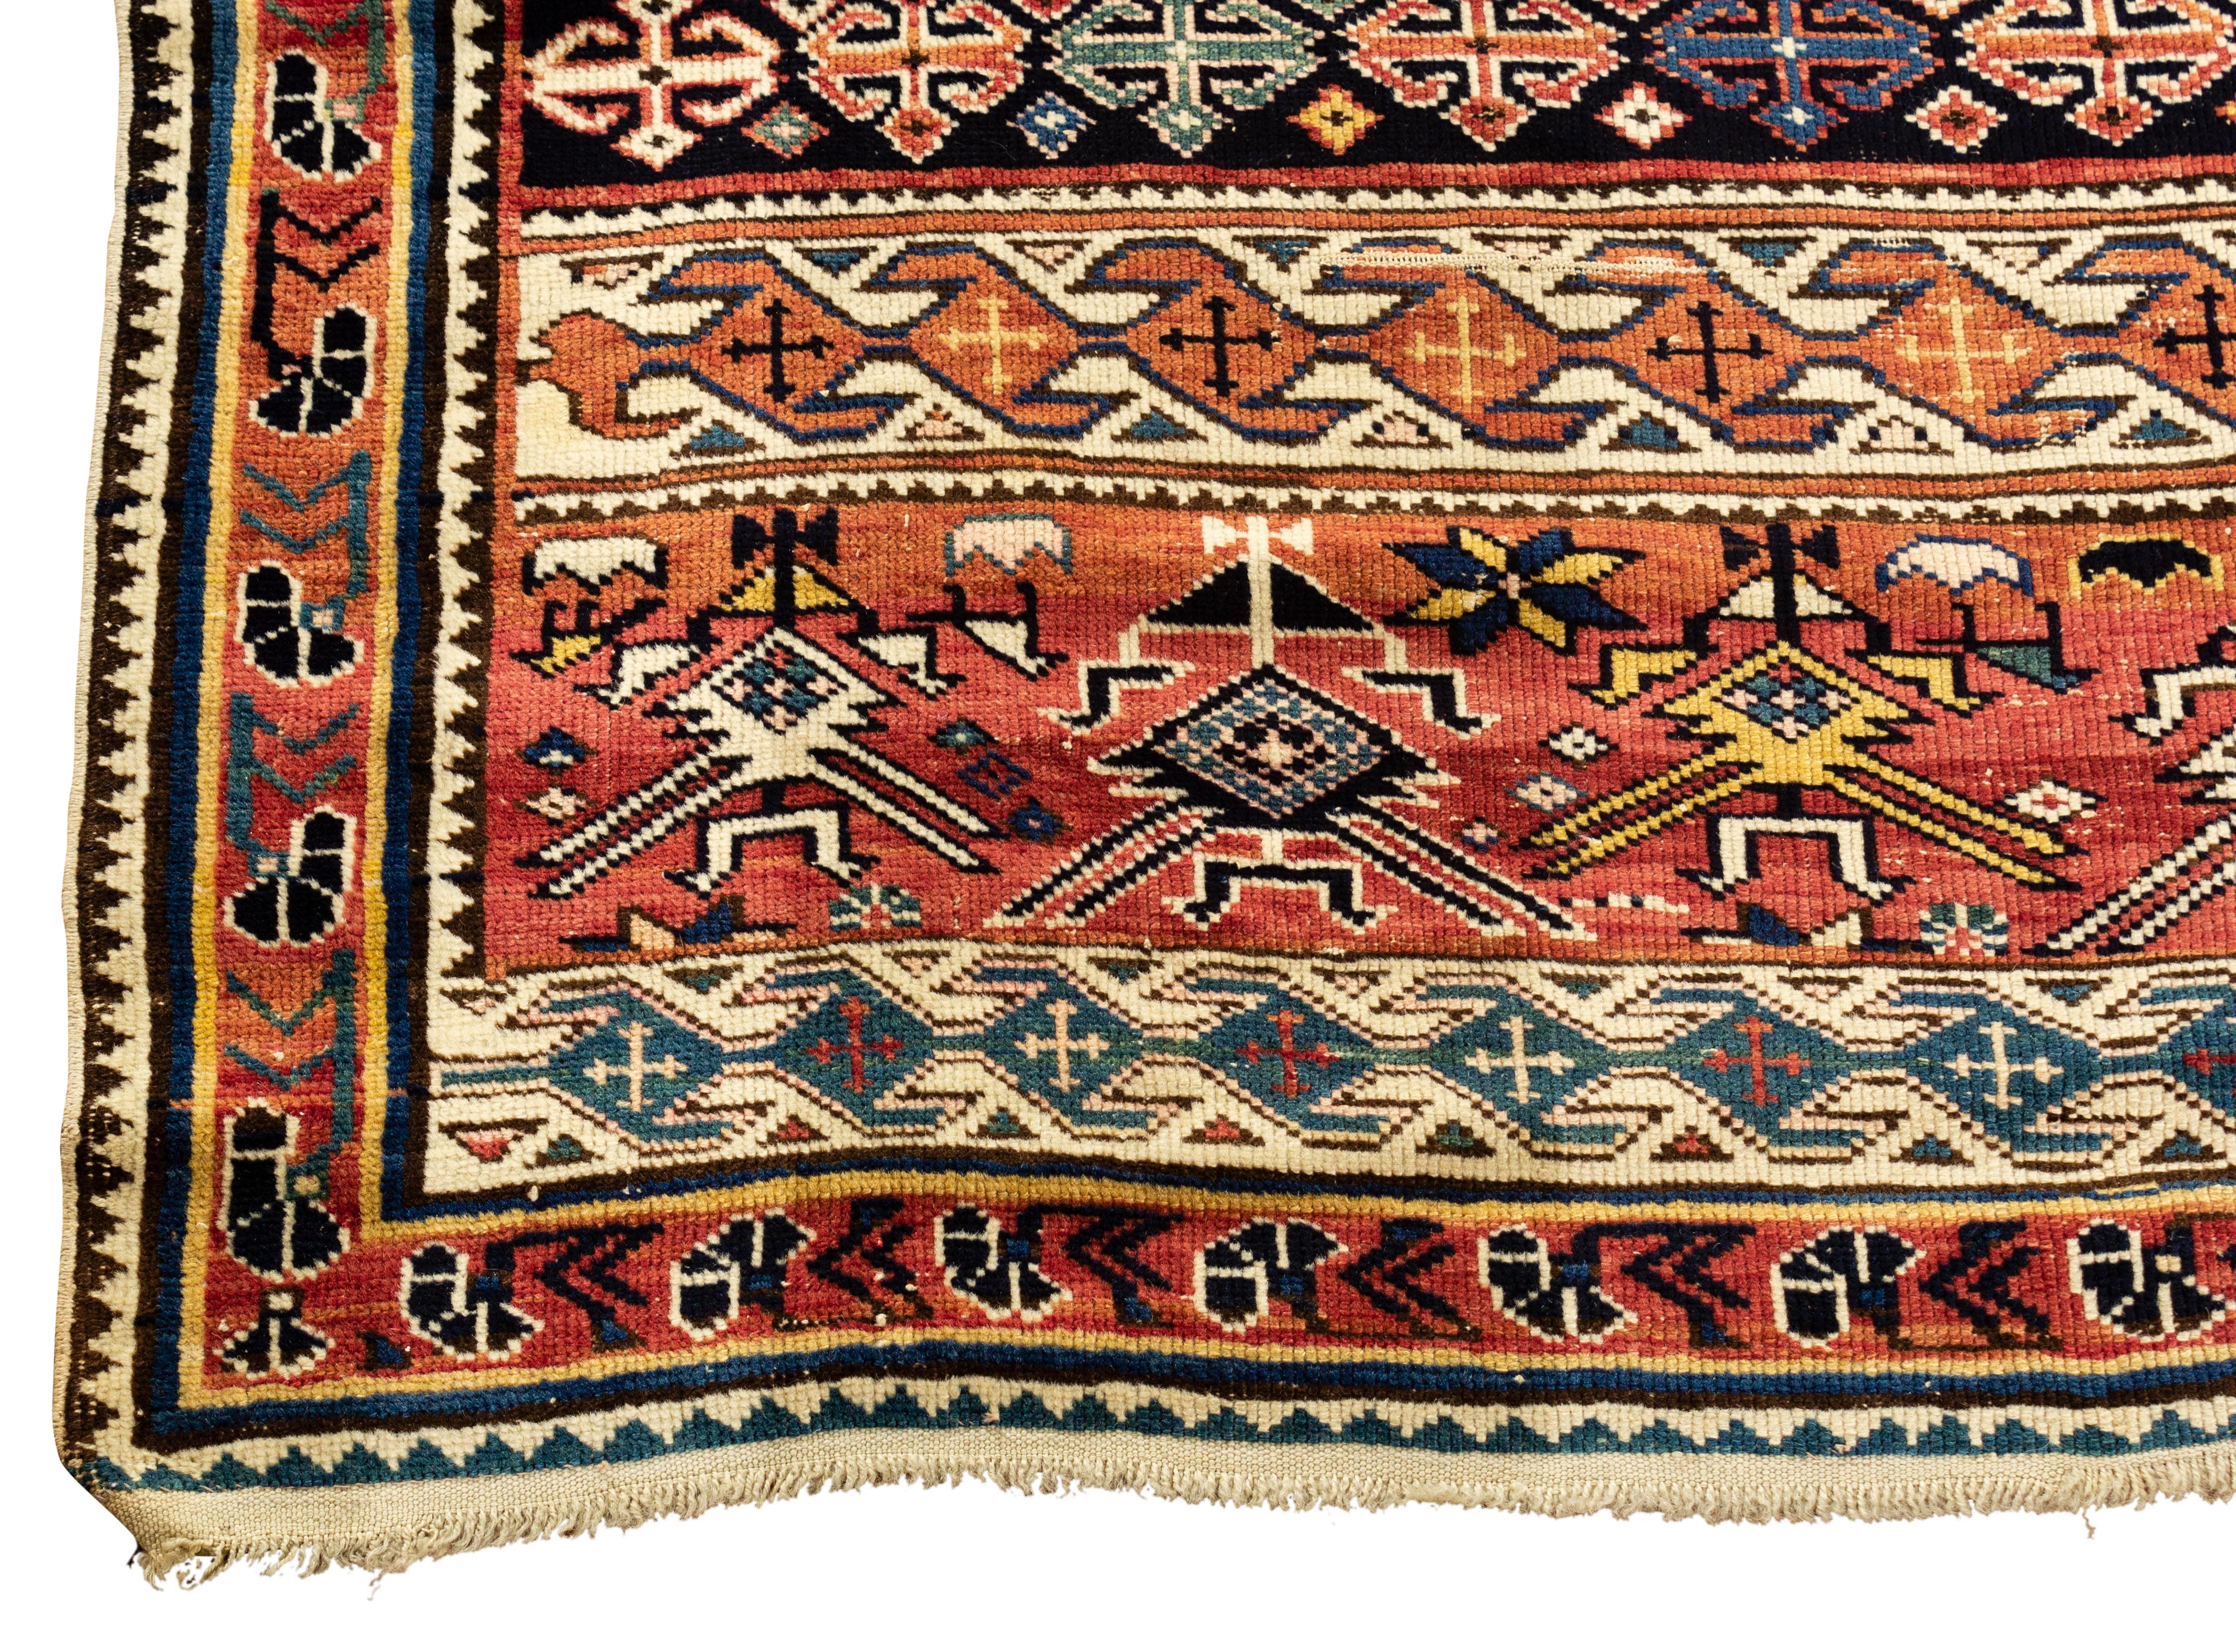 Antique Caucasian Shirvan rug, circa 1880. These types of antique Caucasian rugs were woven in the eastern part of the region, mostly along the west coast of the Caspian Sea, the main field full of traditional designs in a wonderful variety of